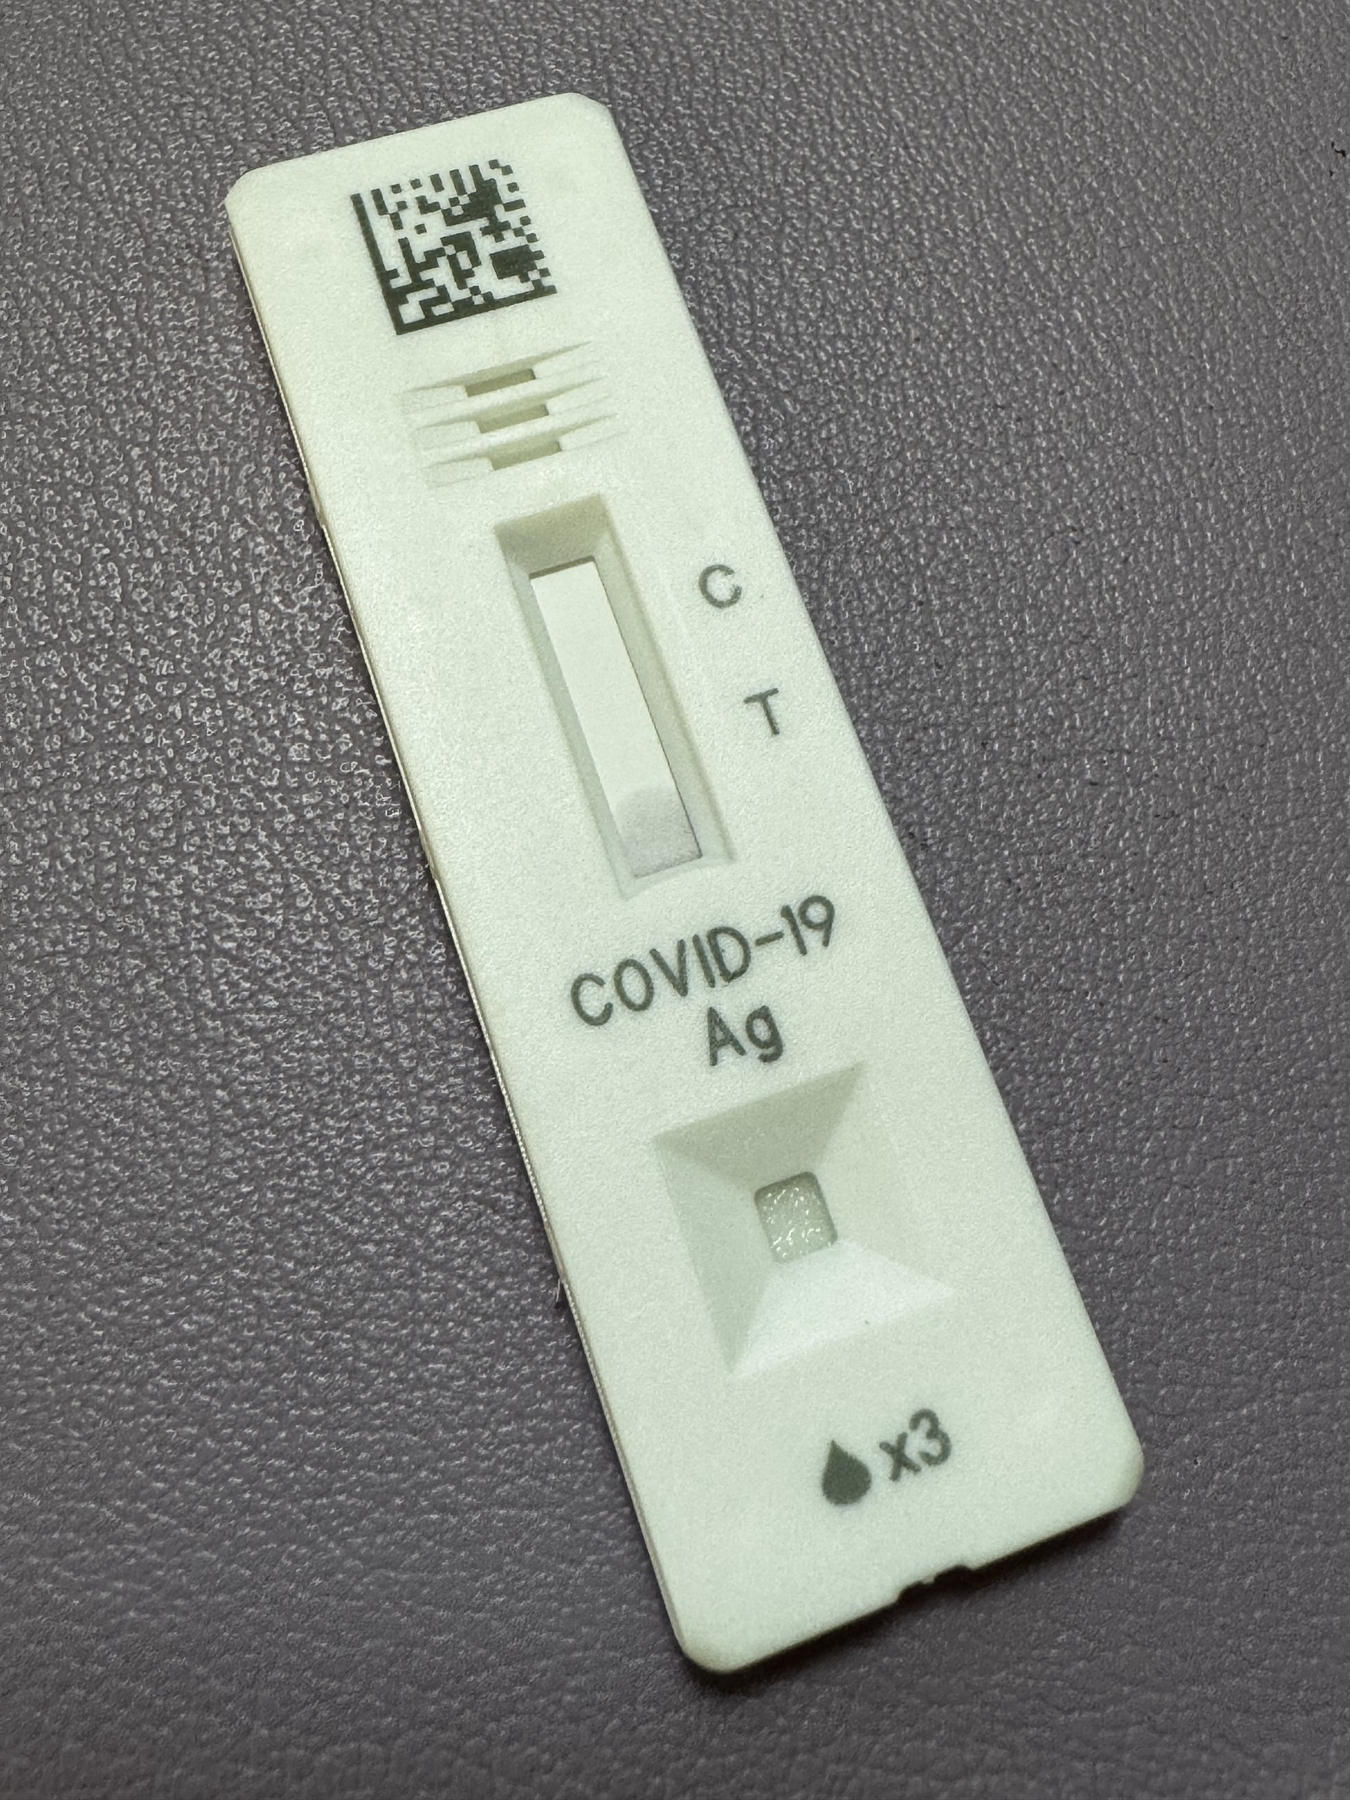 A COVID-19 antigen rapid test device displaying an ambiguous result.